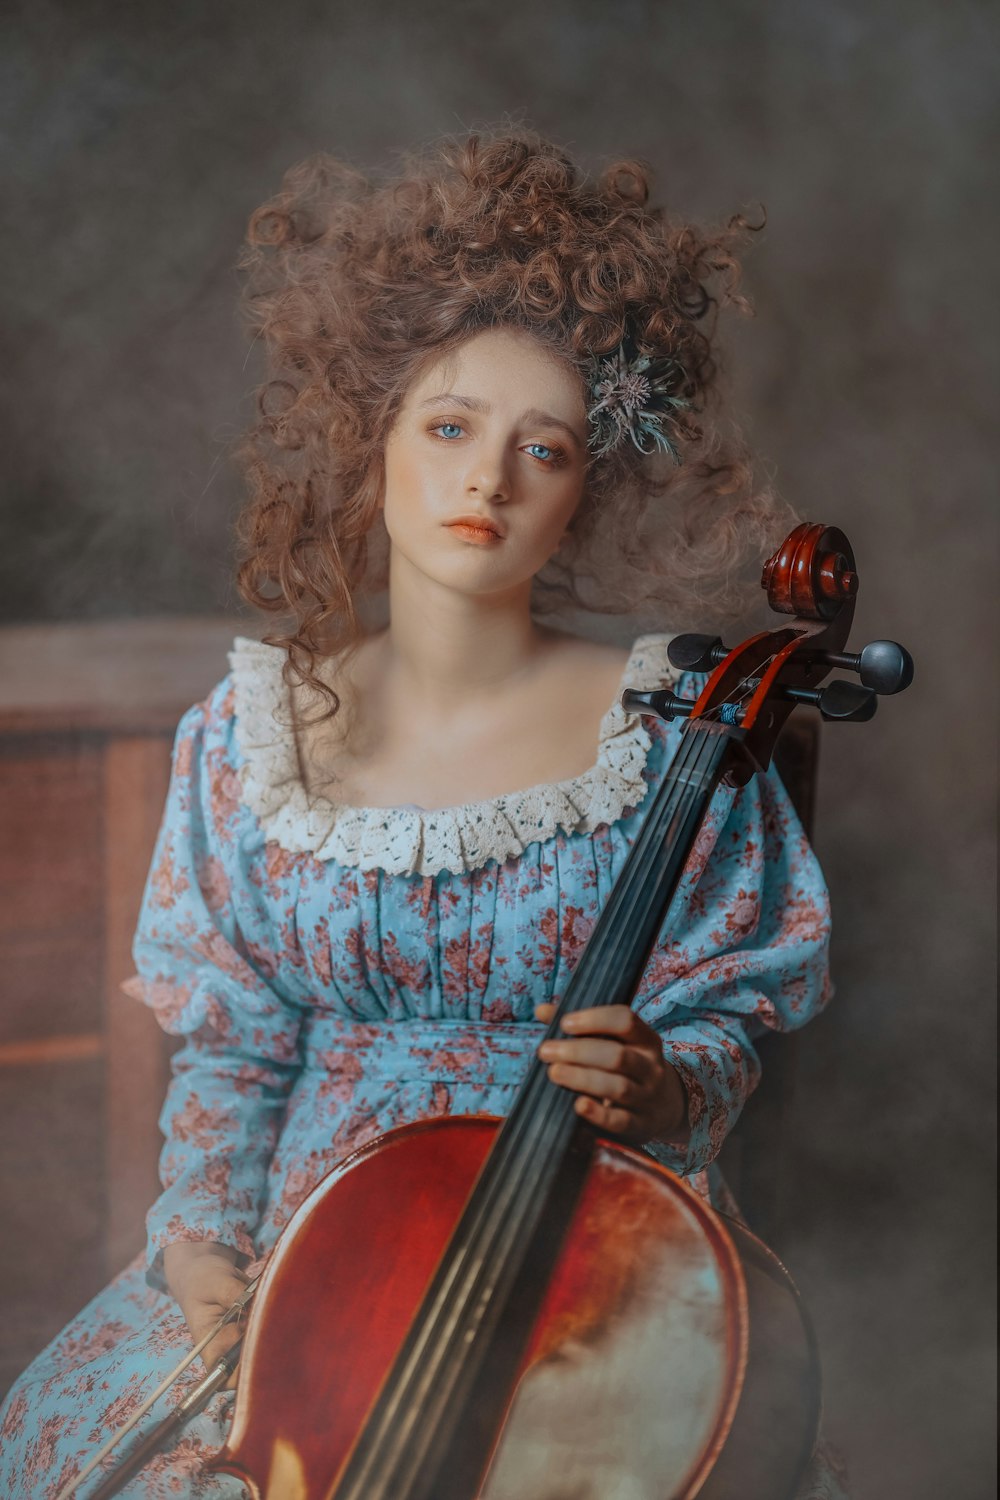 a doll with curly hair holding a violin